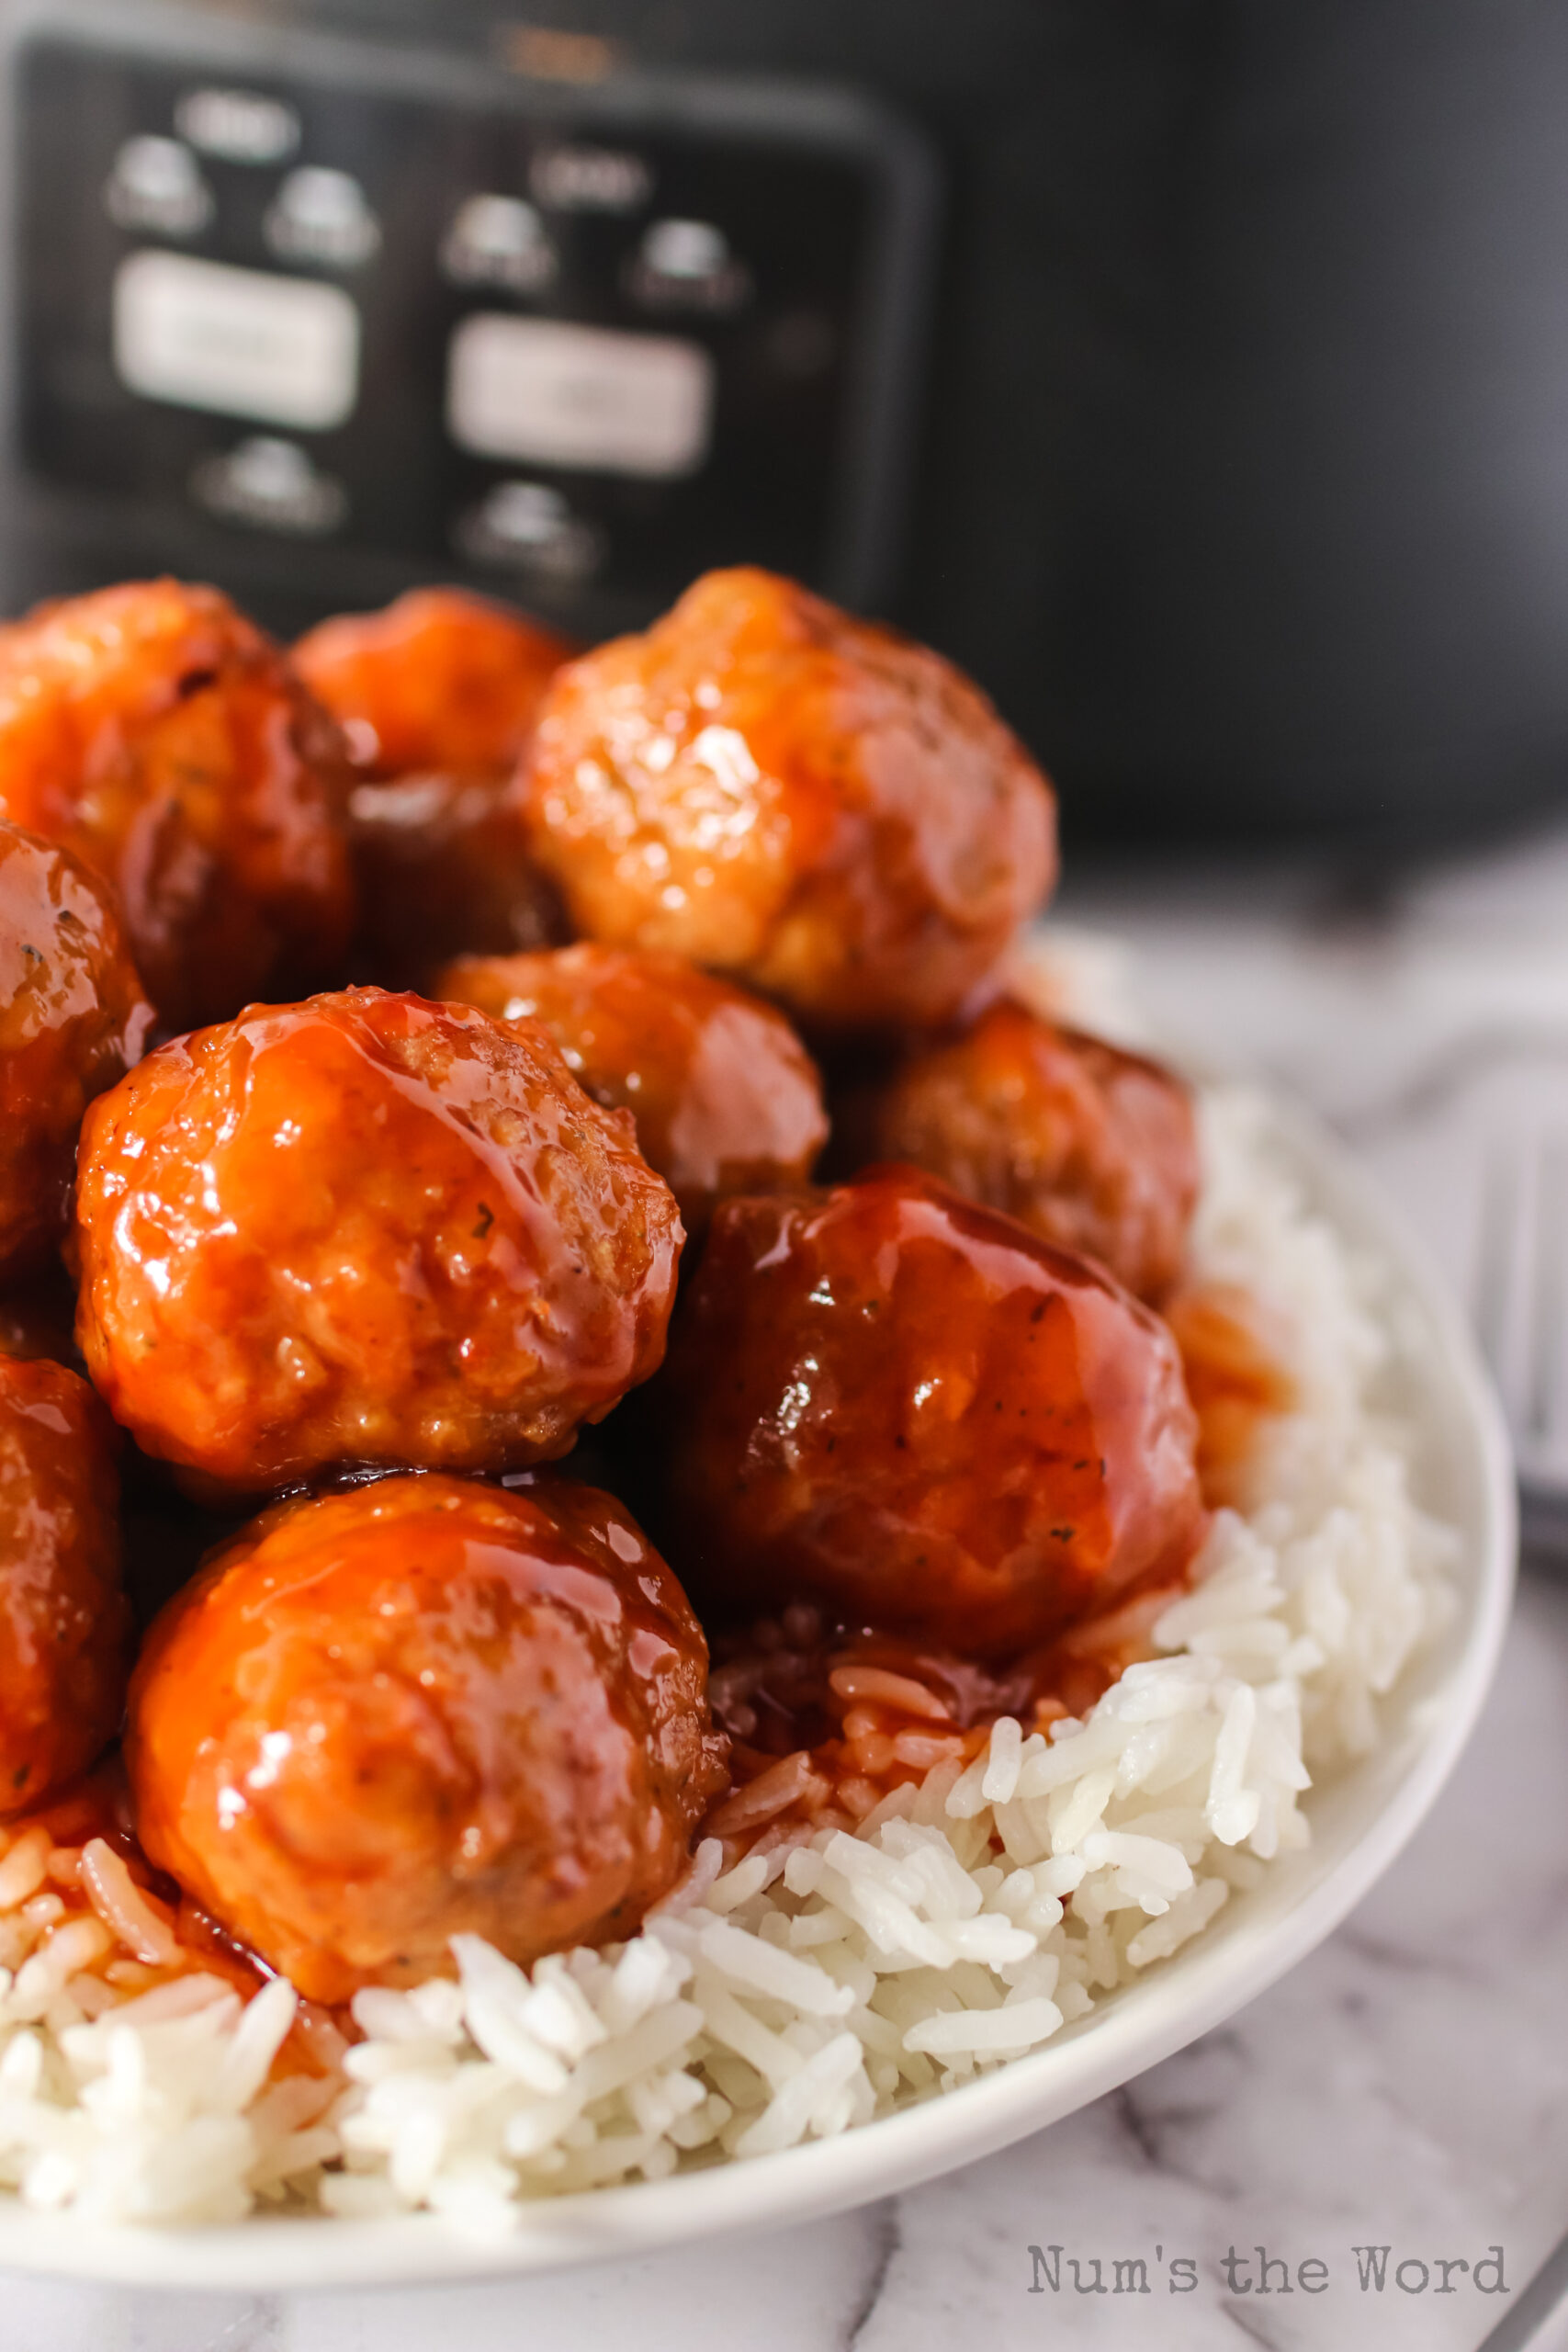 zoomed in side view of meatballs stacked up on plate with rice